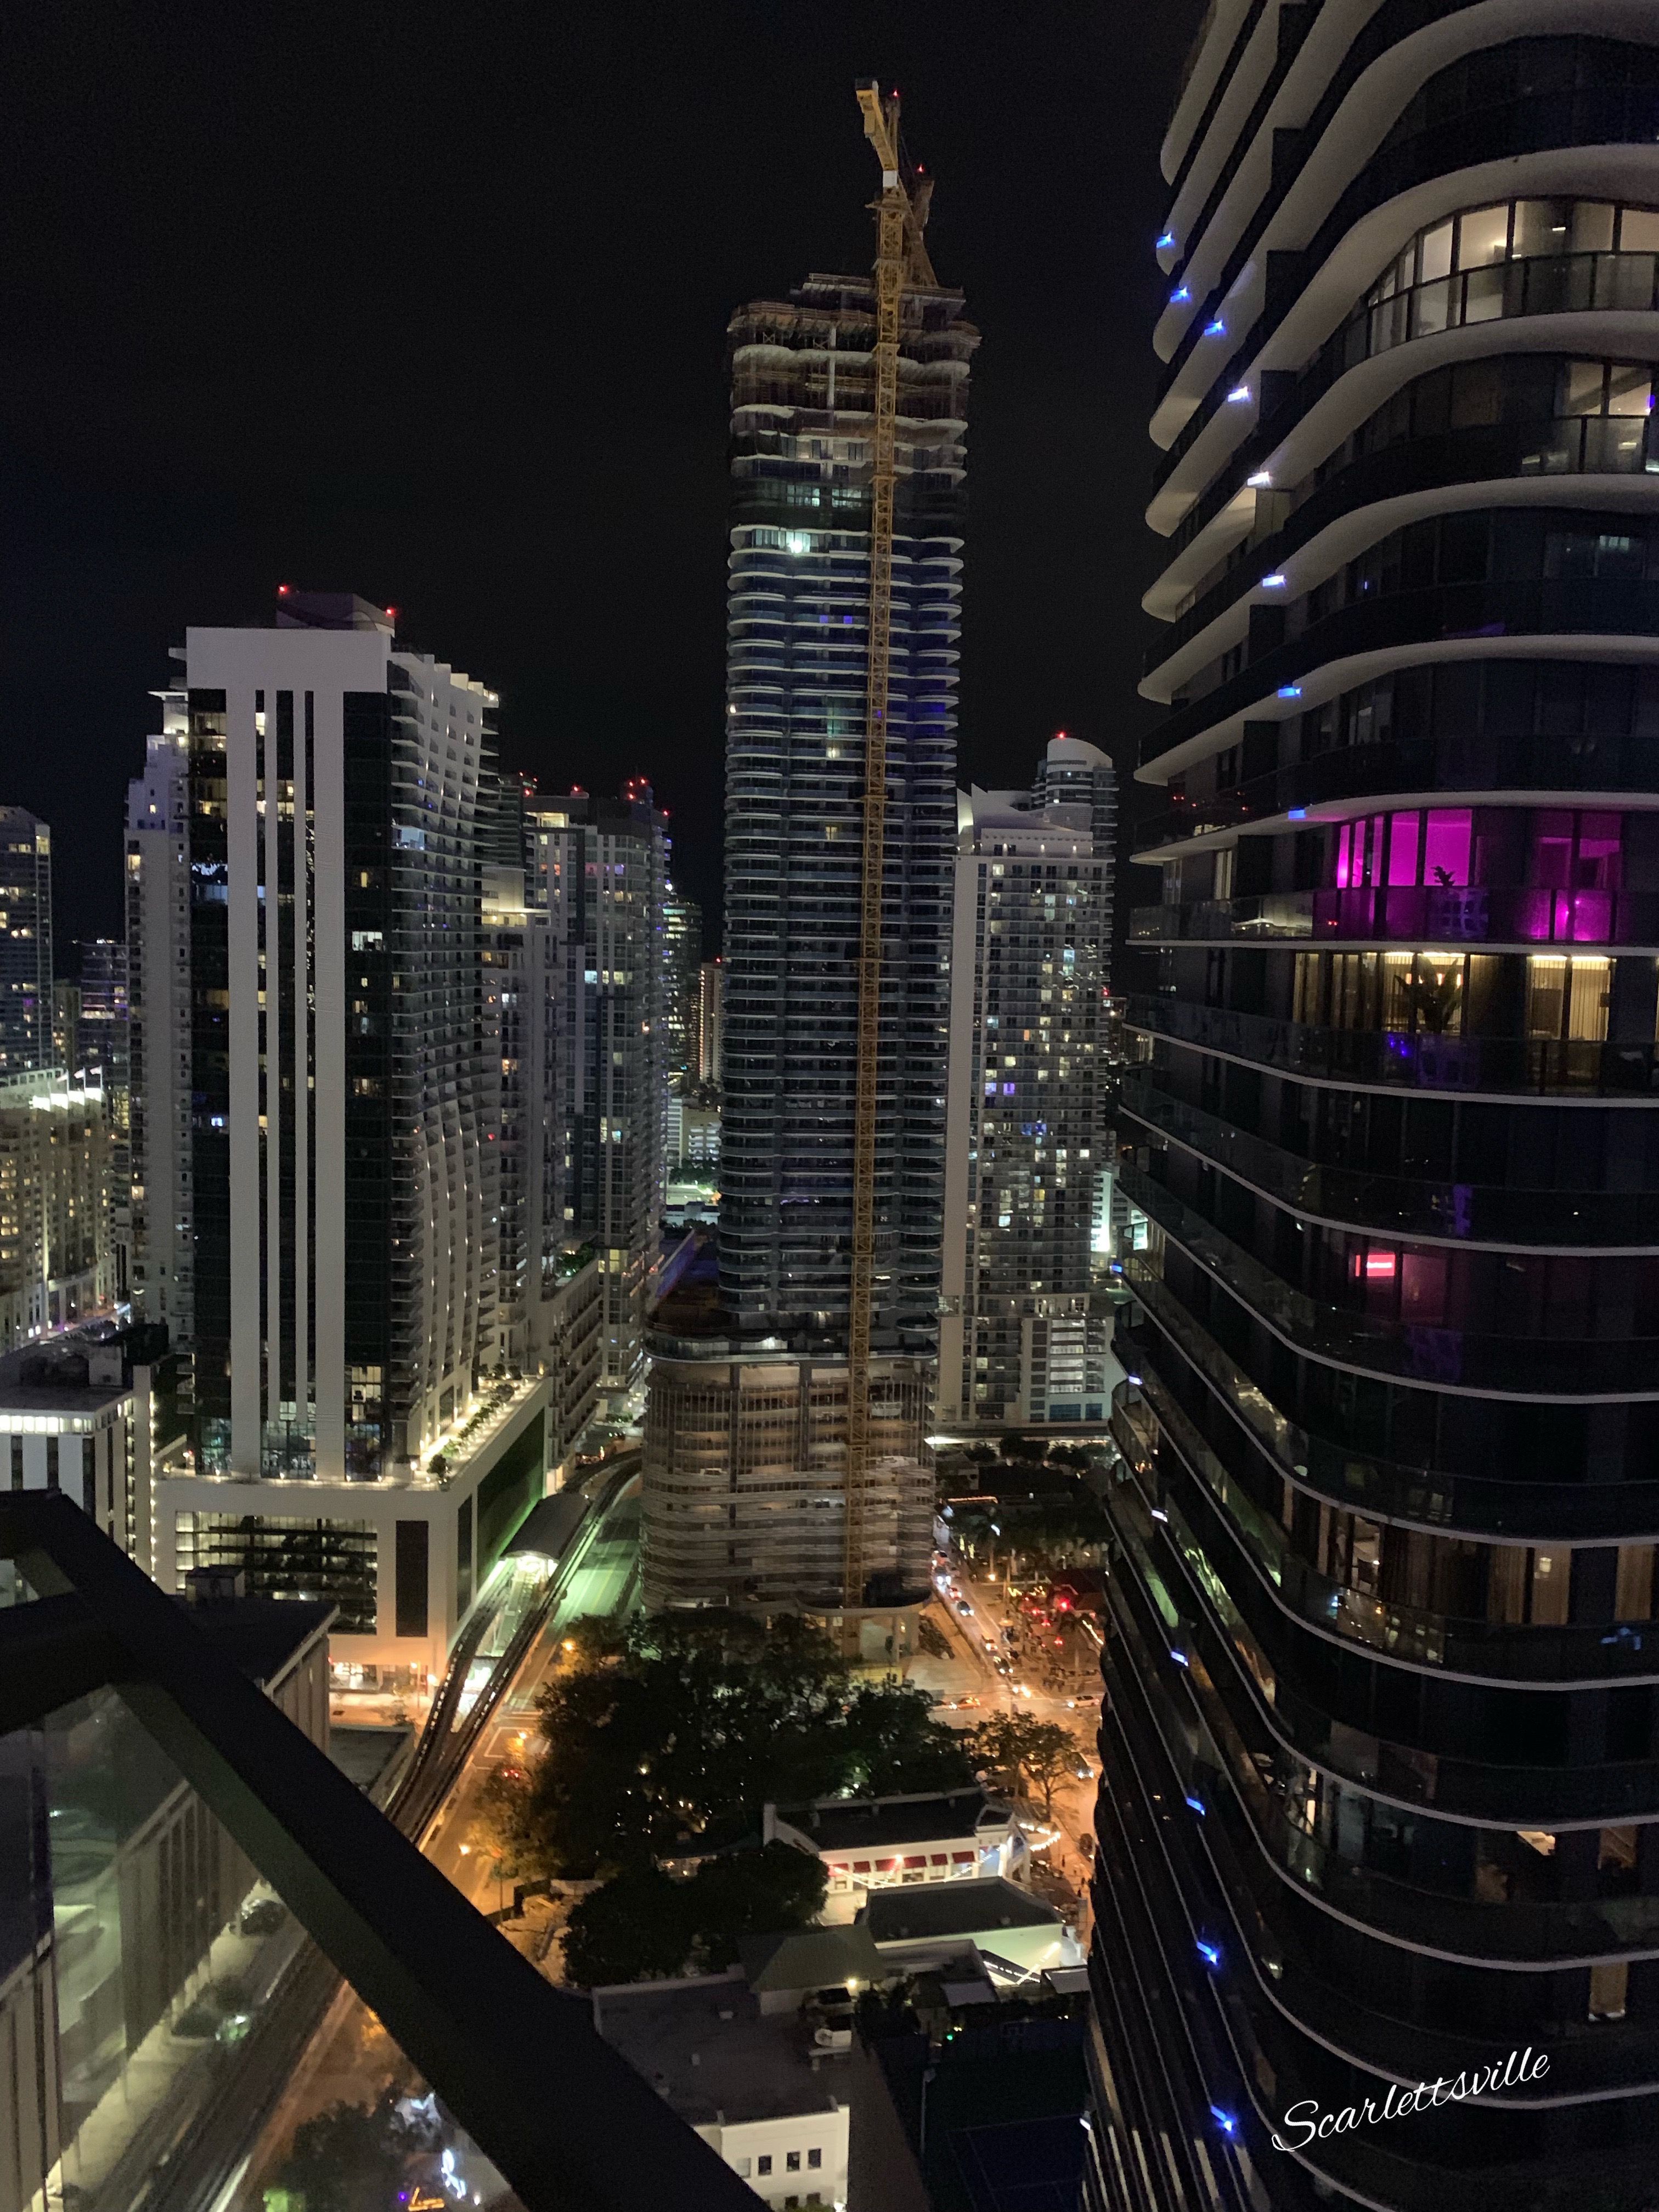 A view of Brickell Key at night from a rooftop bar in Miami. - Miami